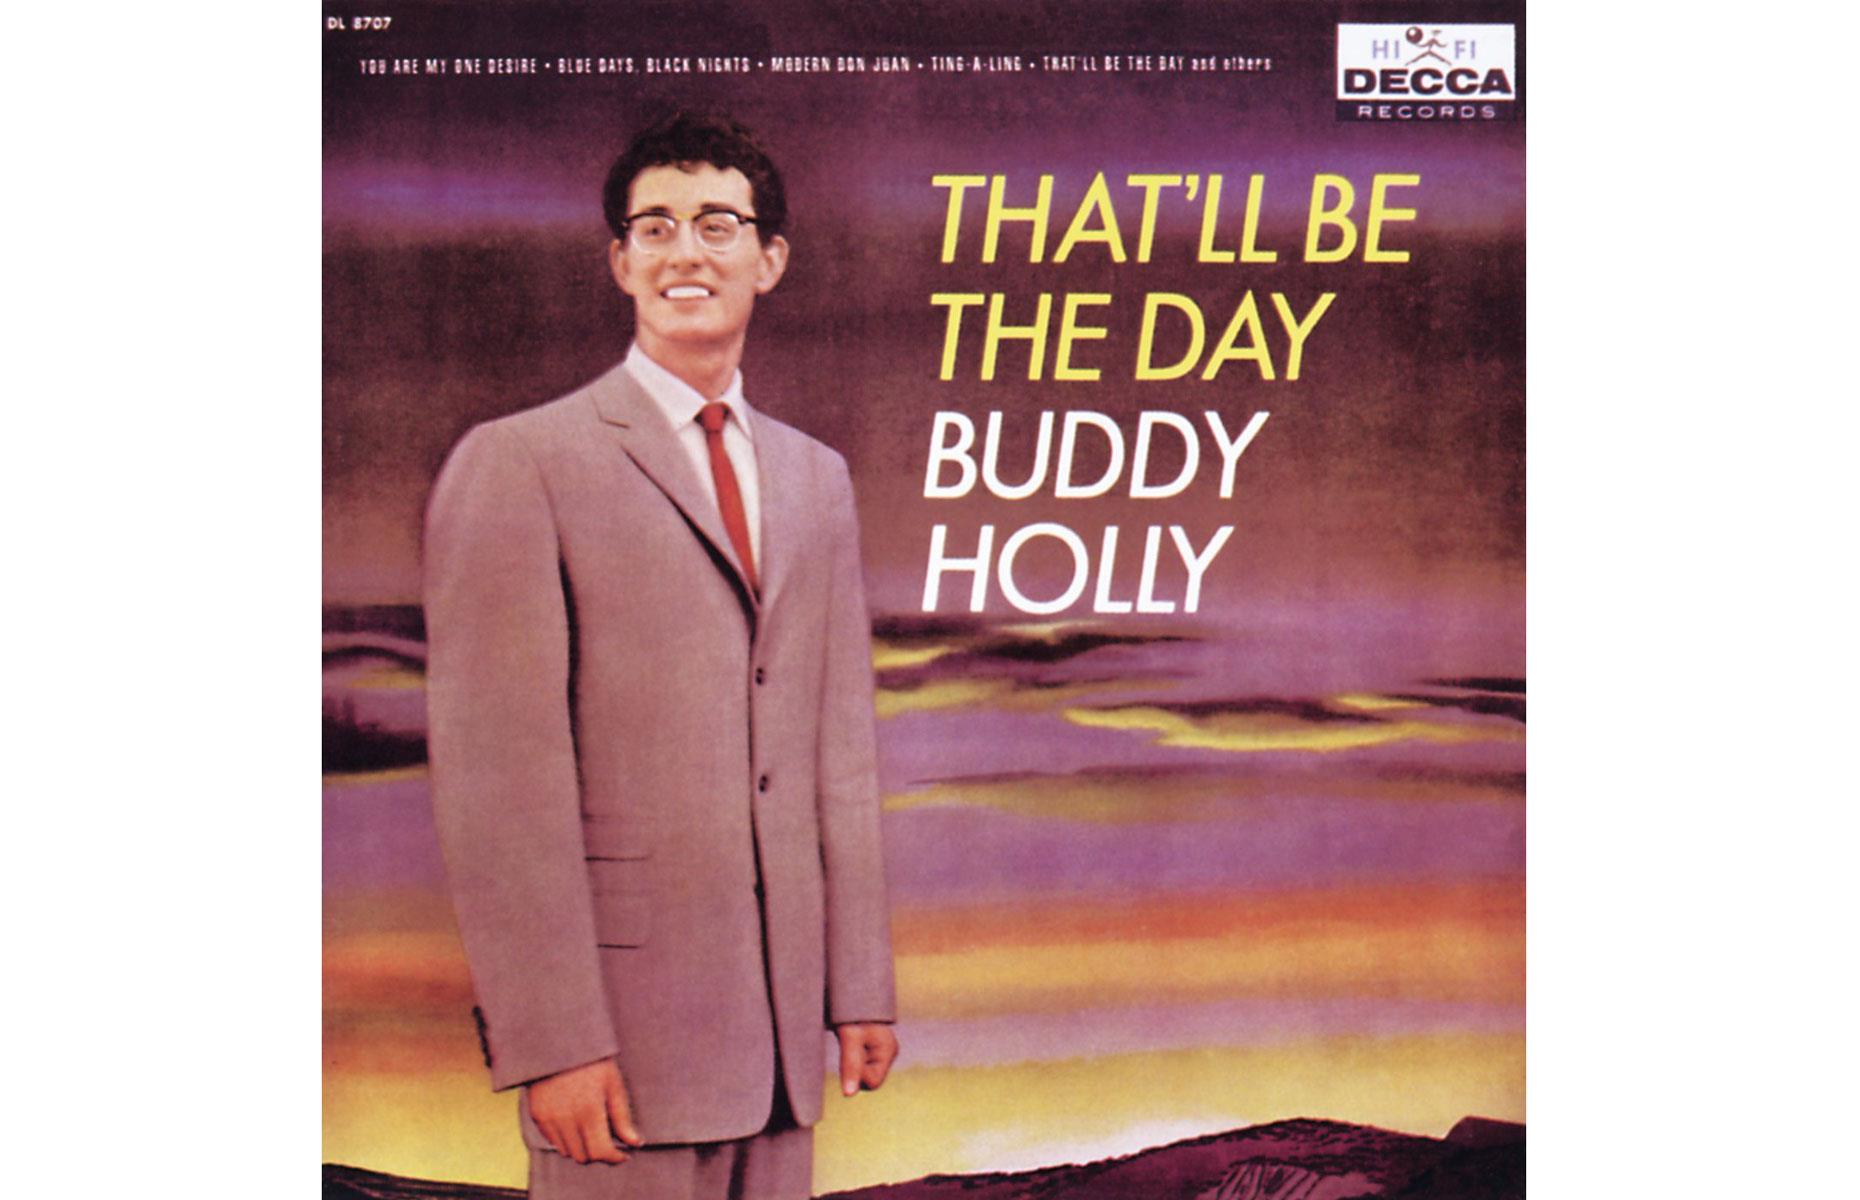 Buddy Holly – That'll Be The Day: up to $1,100 (£935)